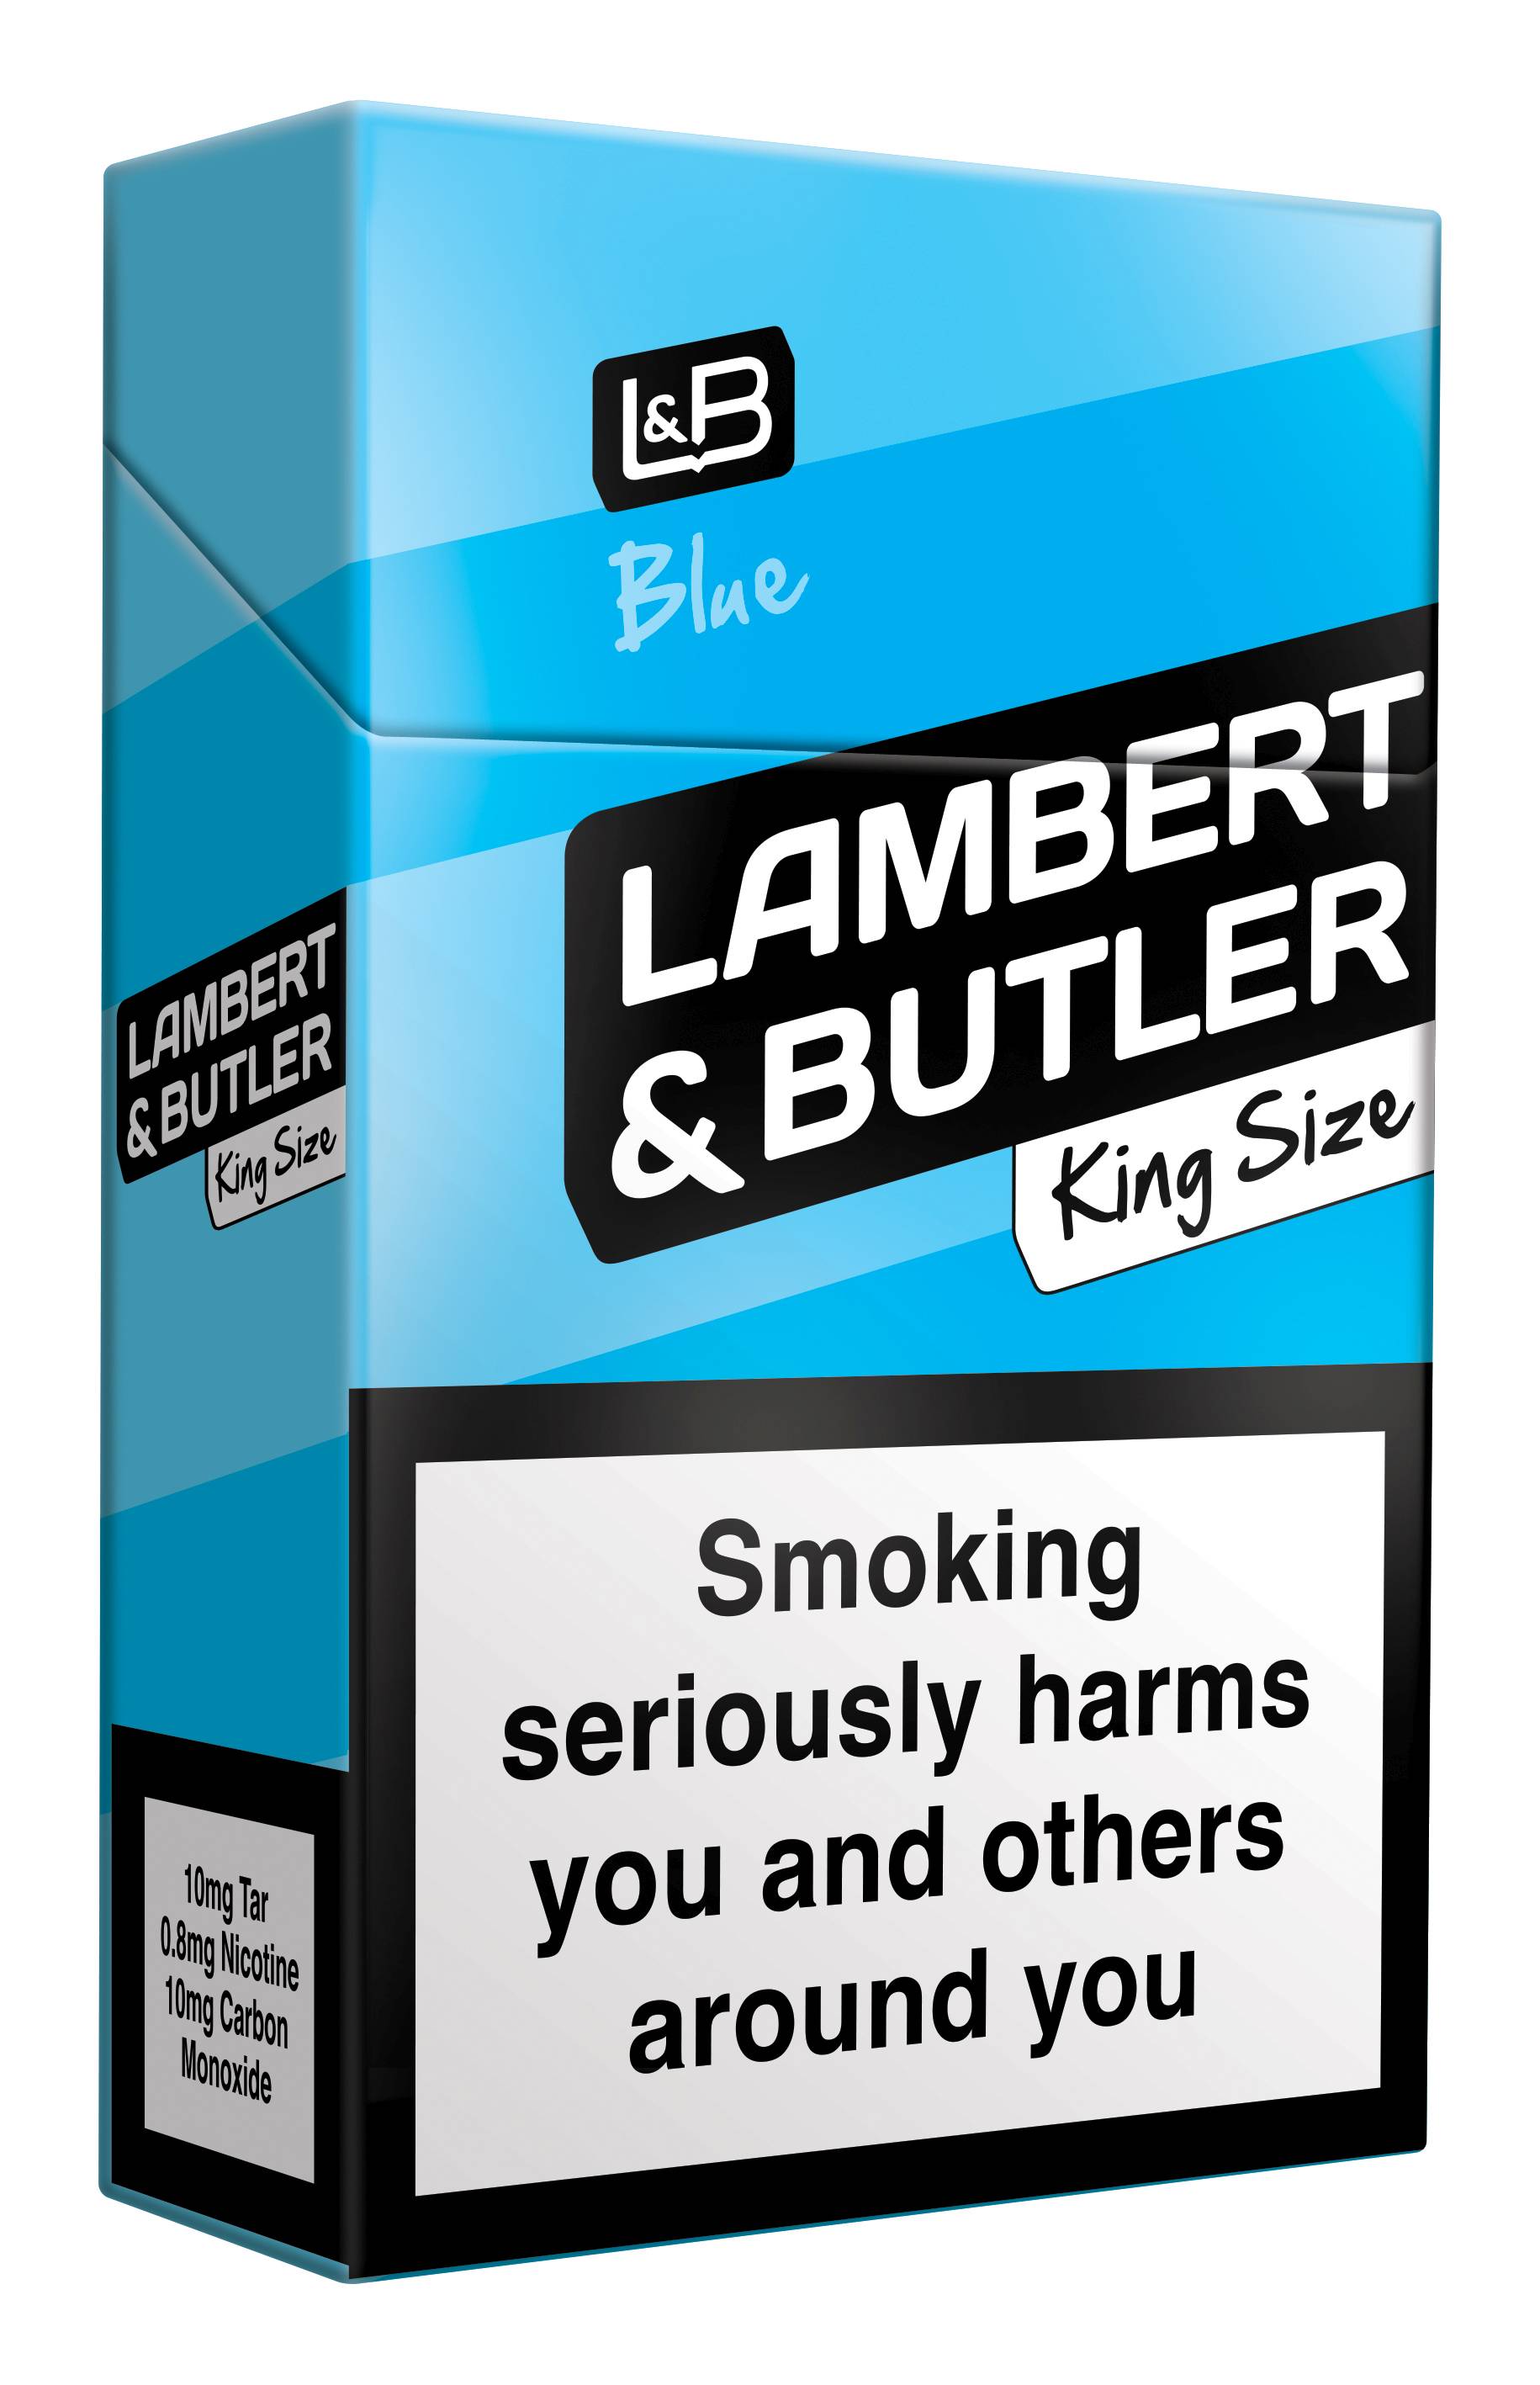 Imperial Tobacco goes big with new 21s box format, Product News